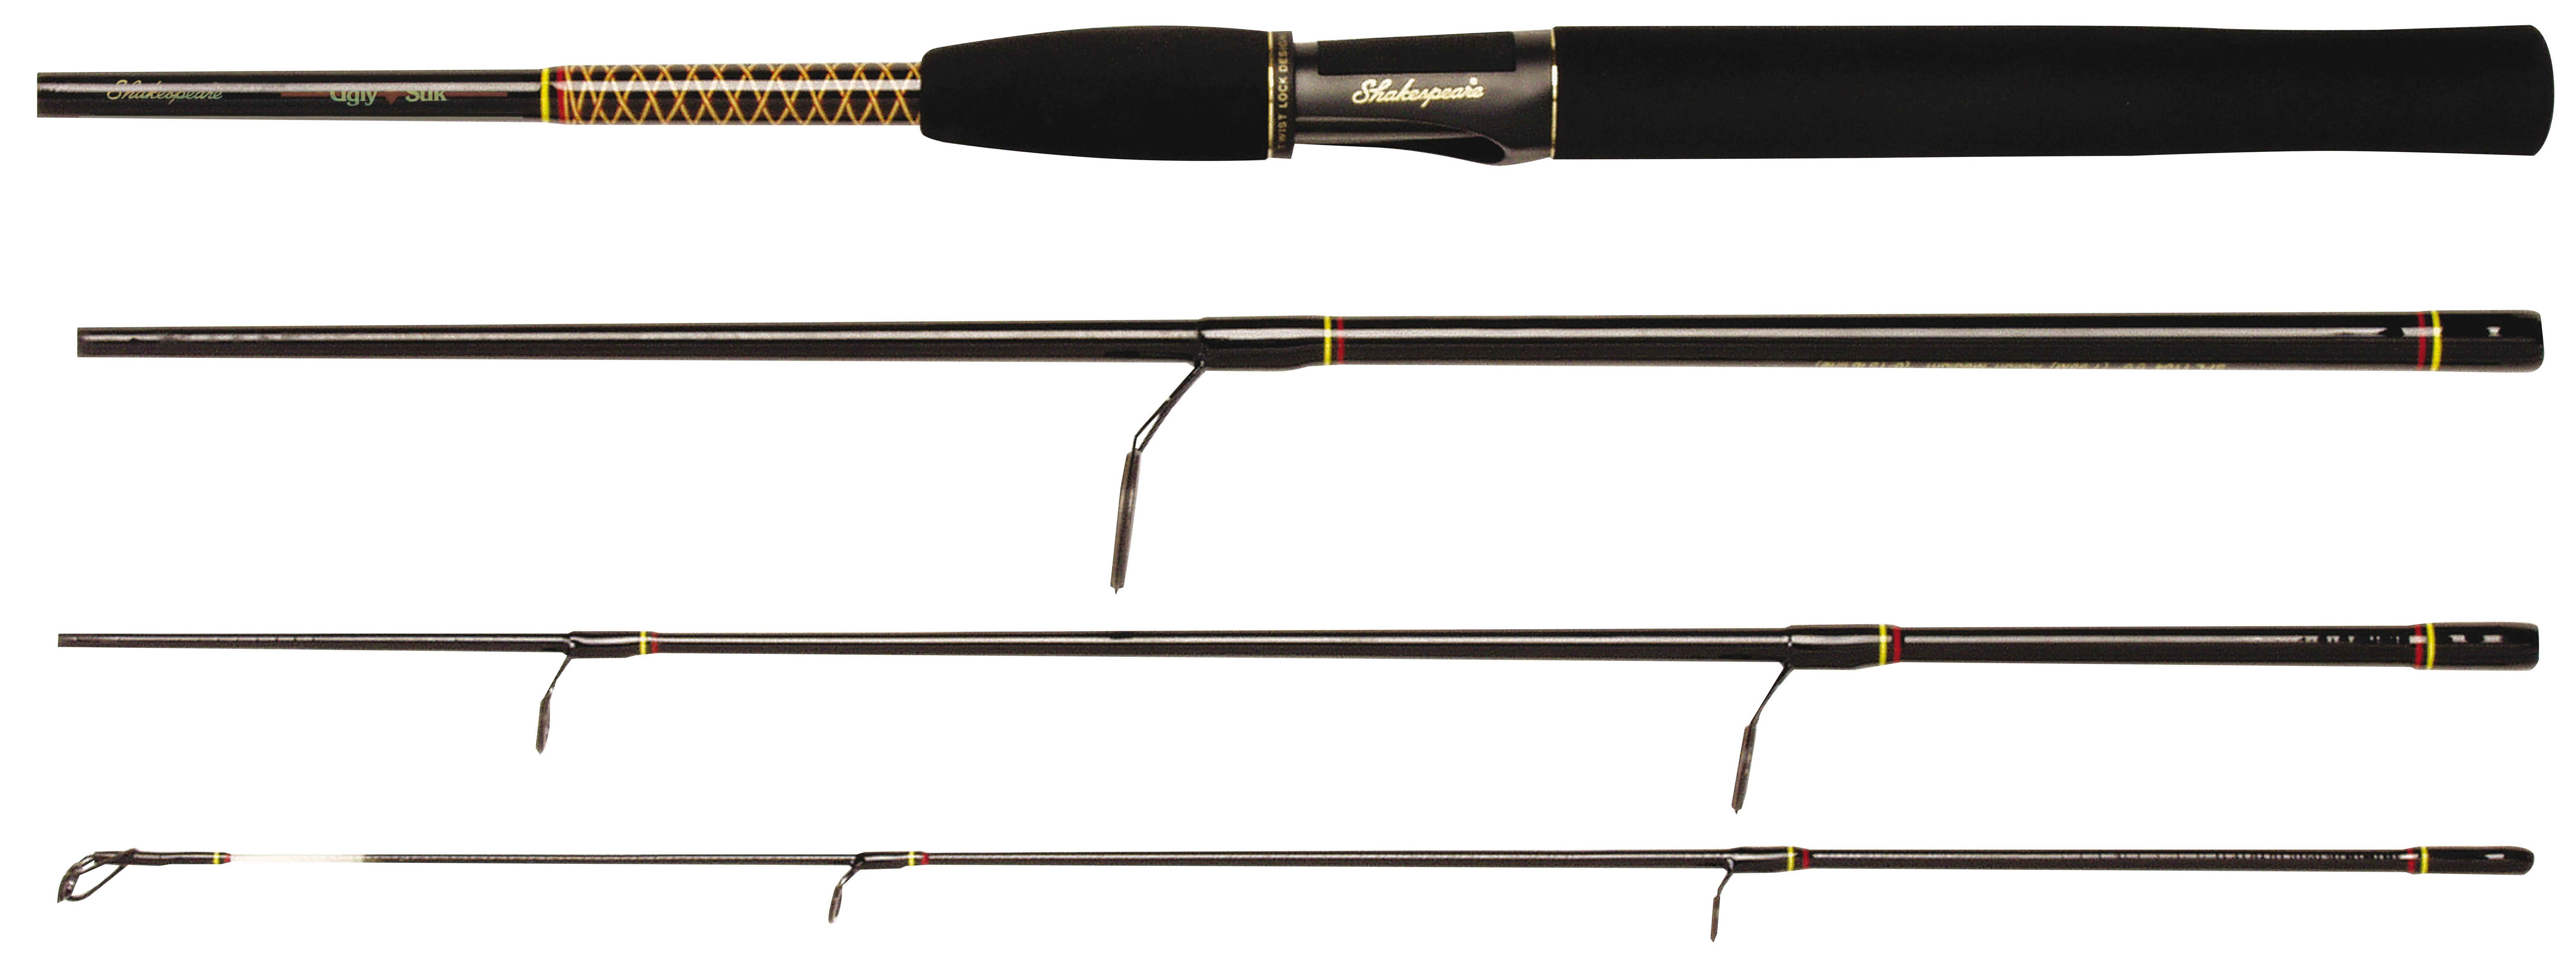 Shakespeare 1810 and Fly Rod?, Another Spin on Glass